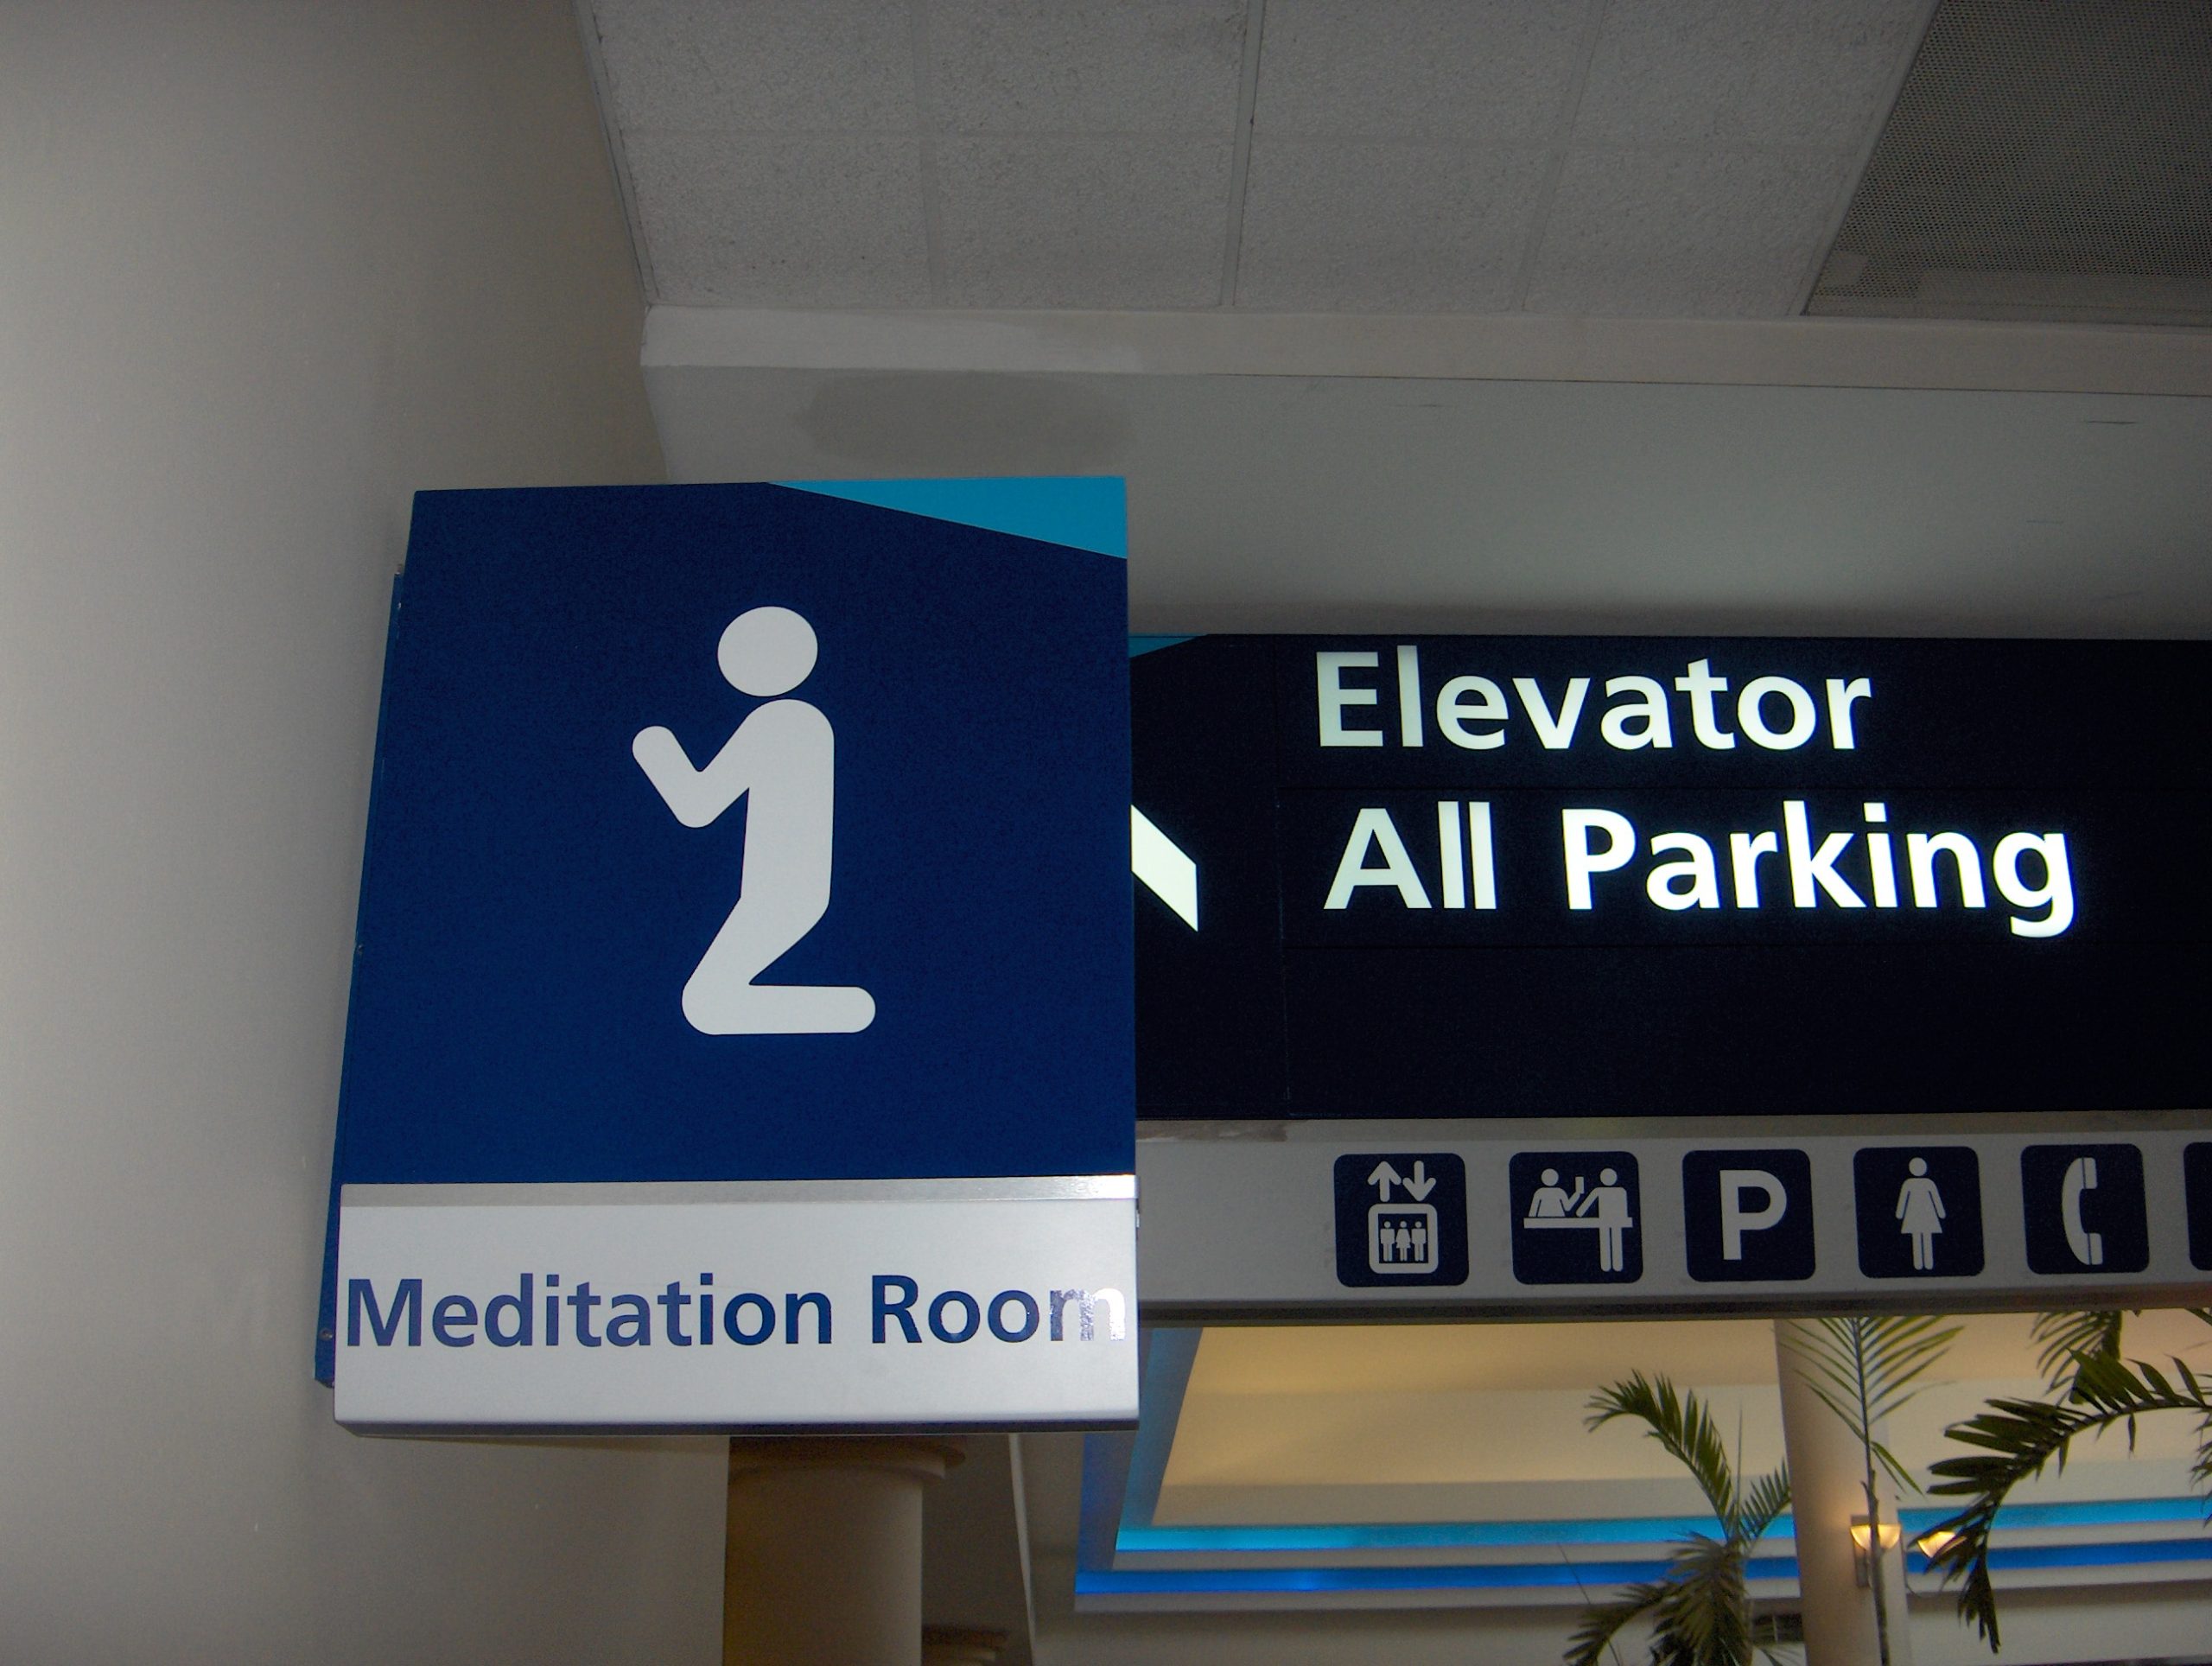 A sign attached to the wall reads," Meditation Room" and uses the generic image of a person kneeling.